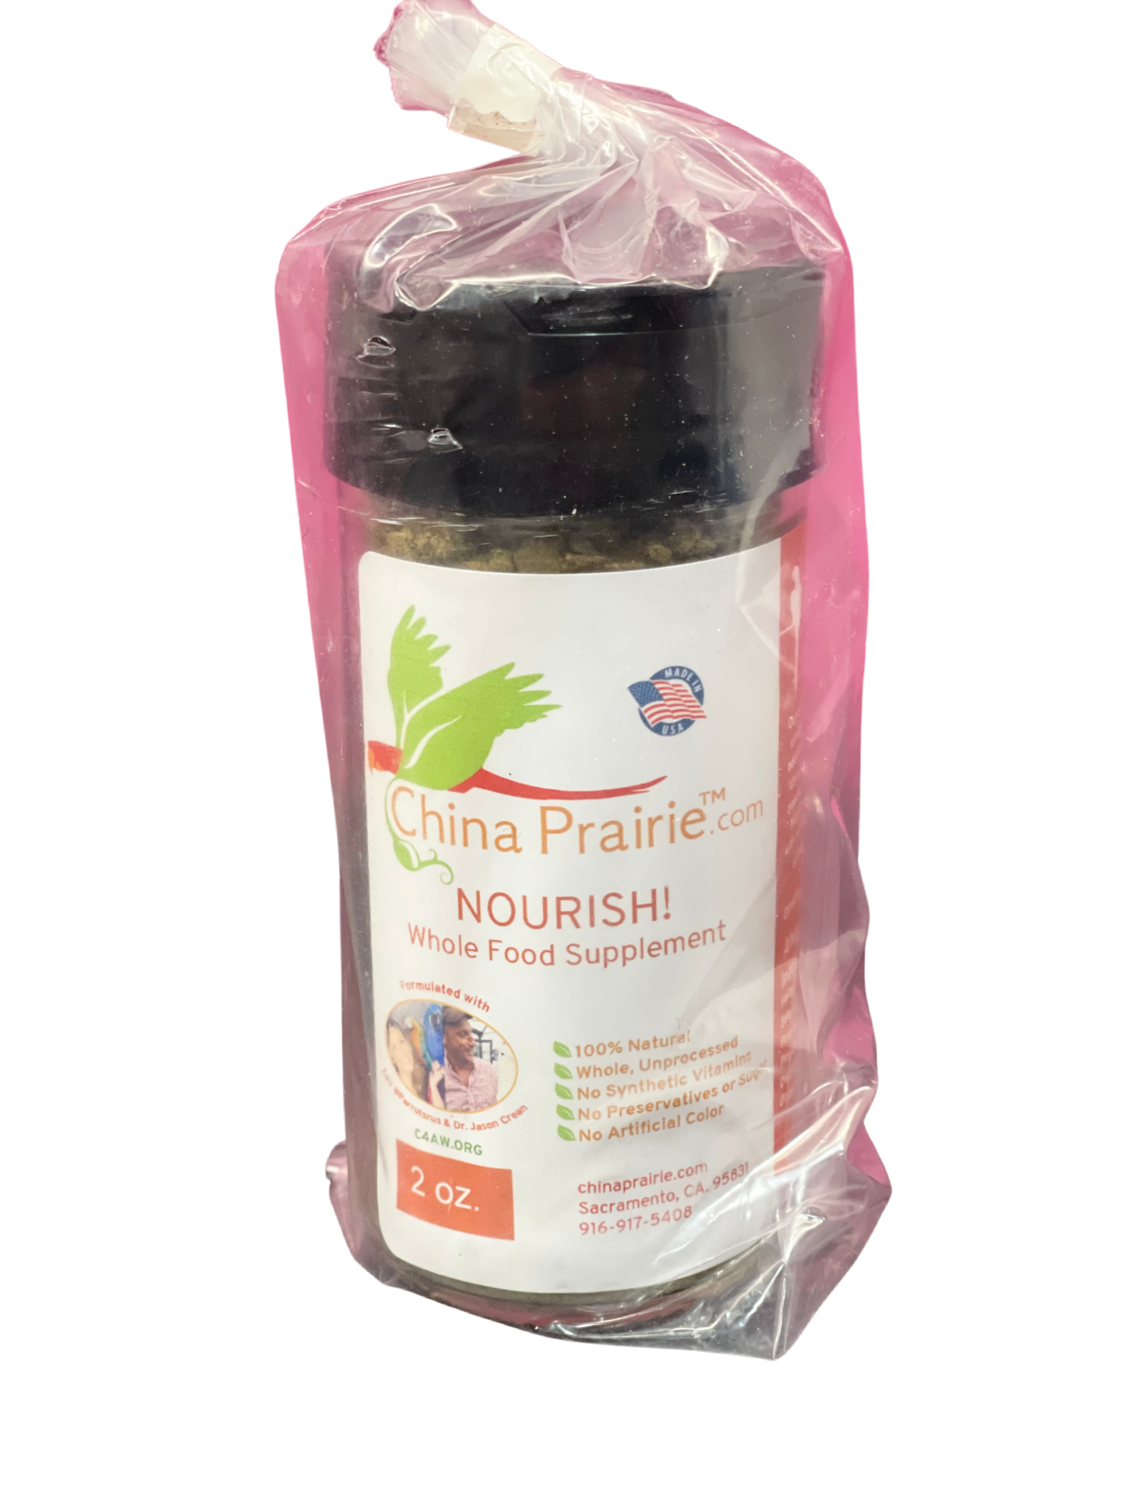 Nourish! Whole Food Supplement in Refillable Shaker